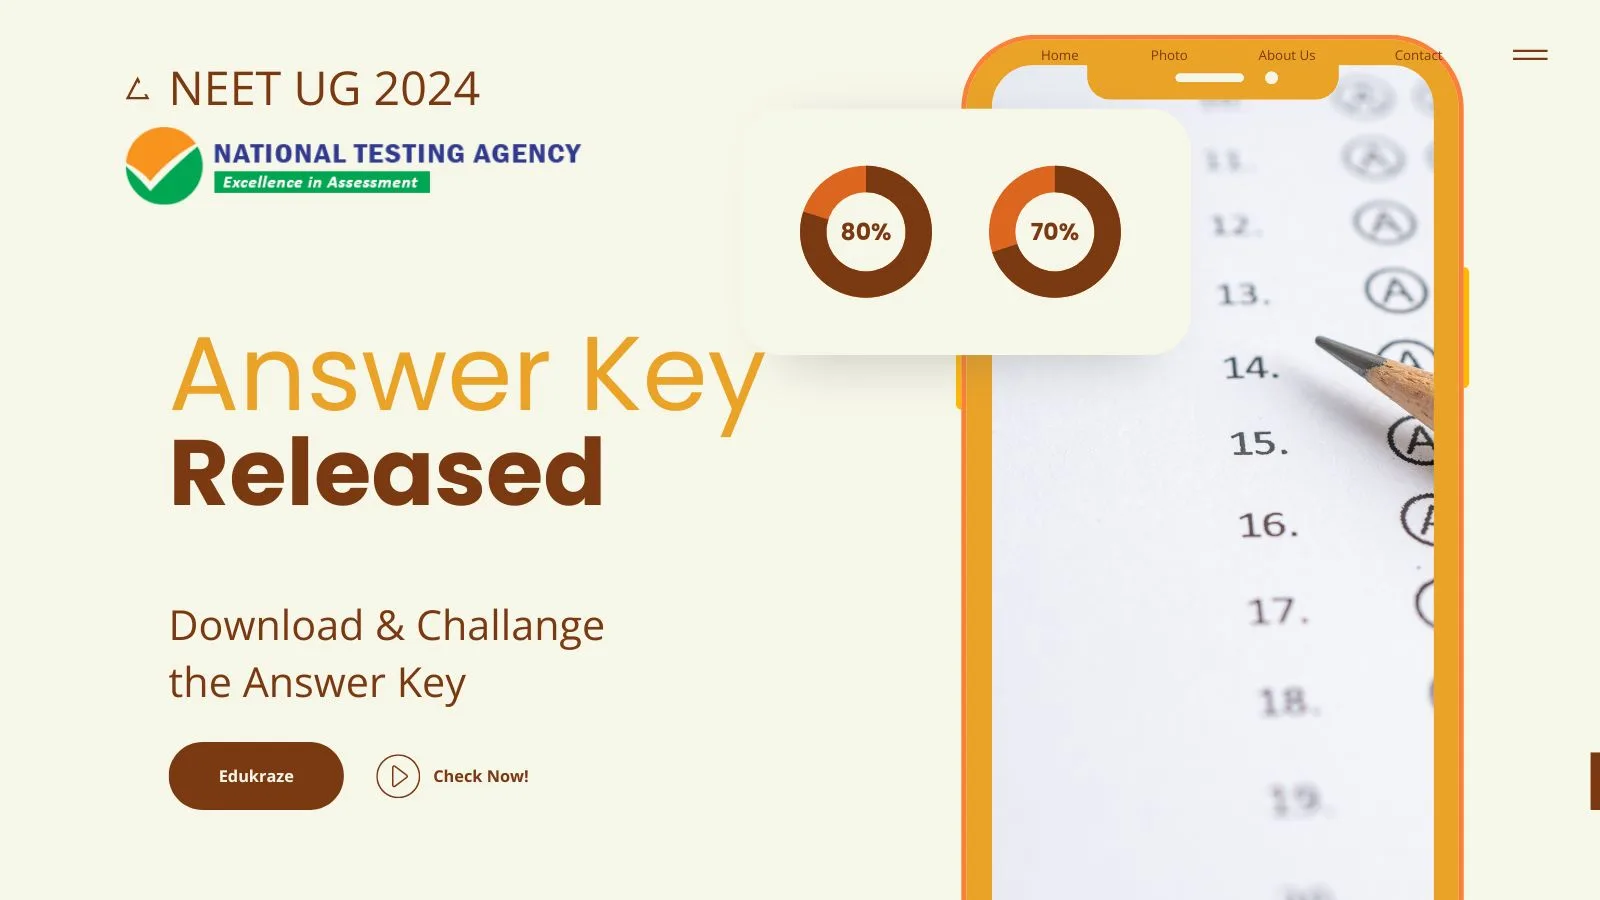 NEET UG 2024 Answer Key Released: How to Download and Challenge